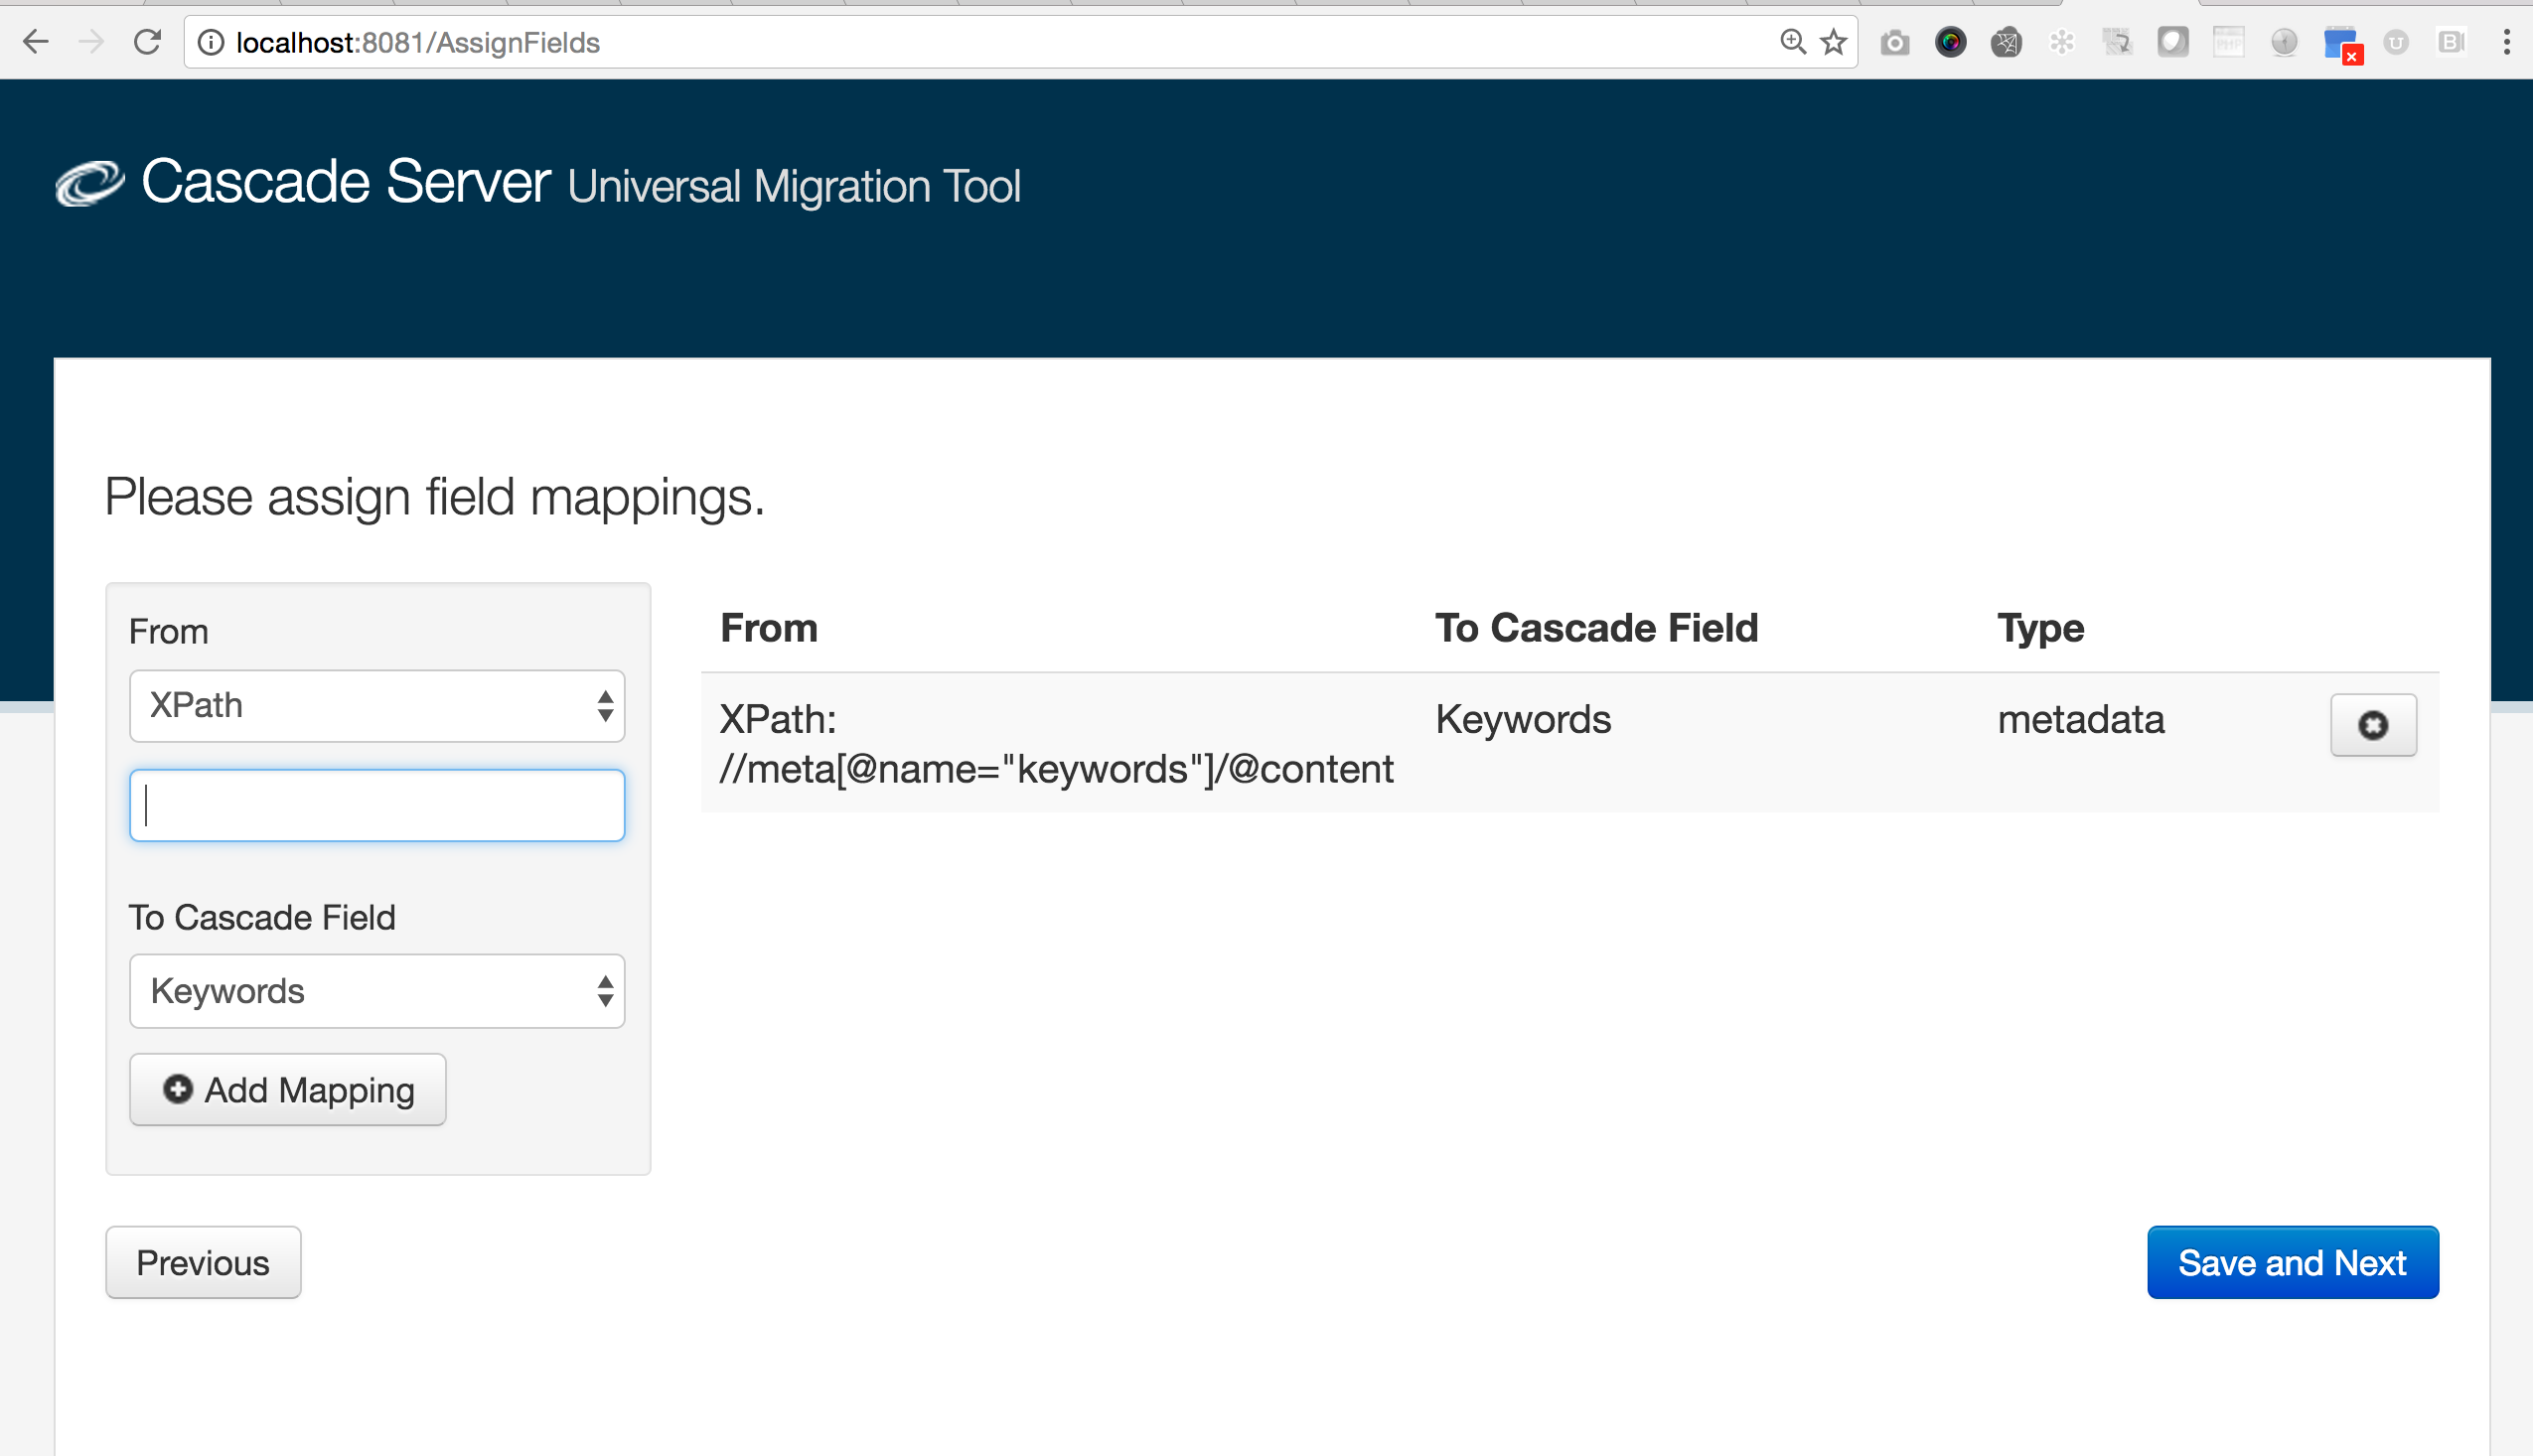 XPath mapping screen for migration tool